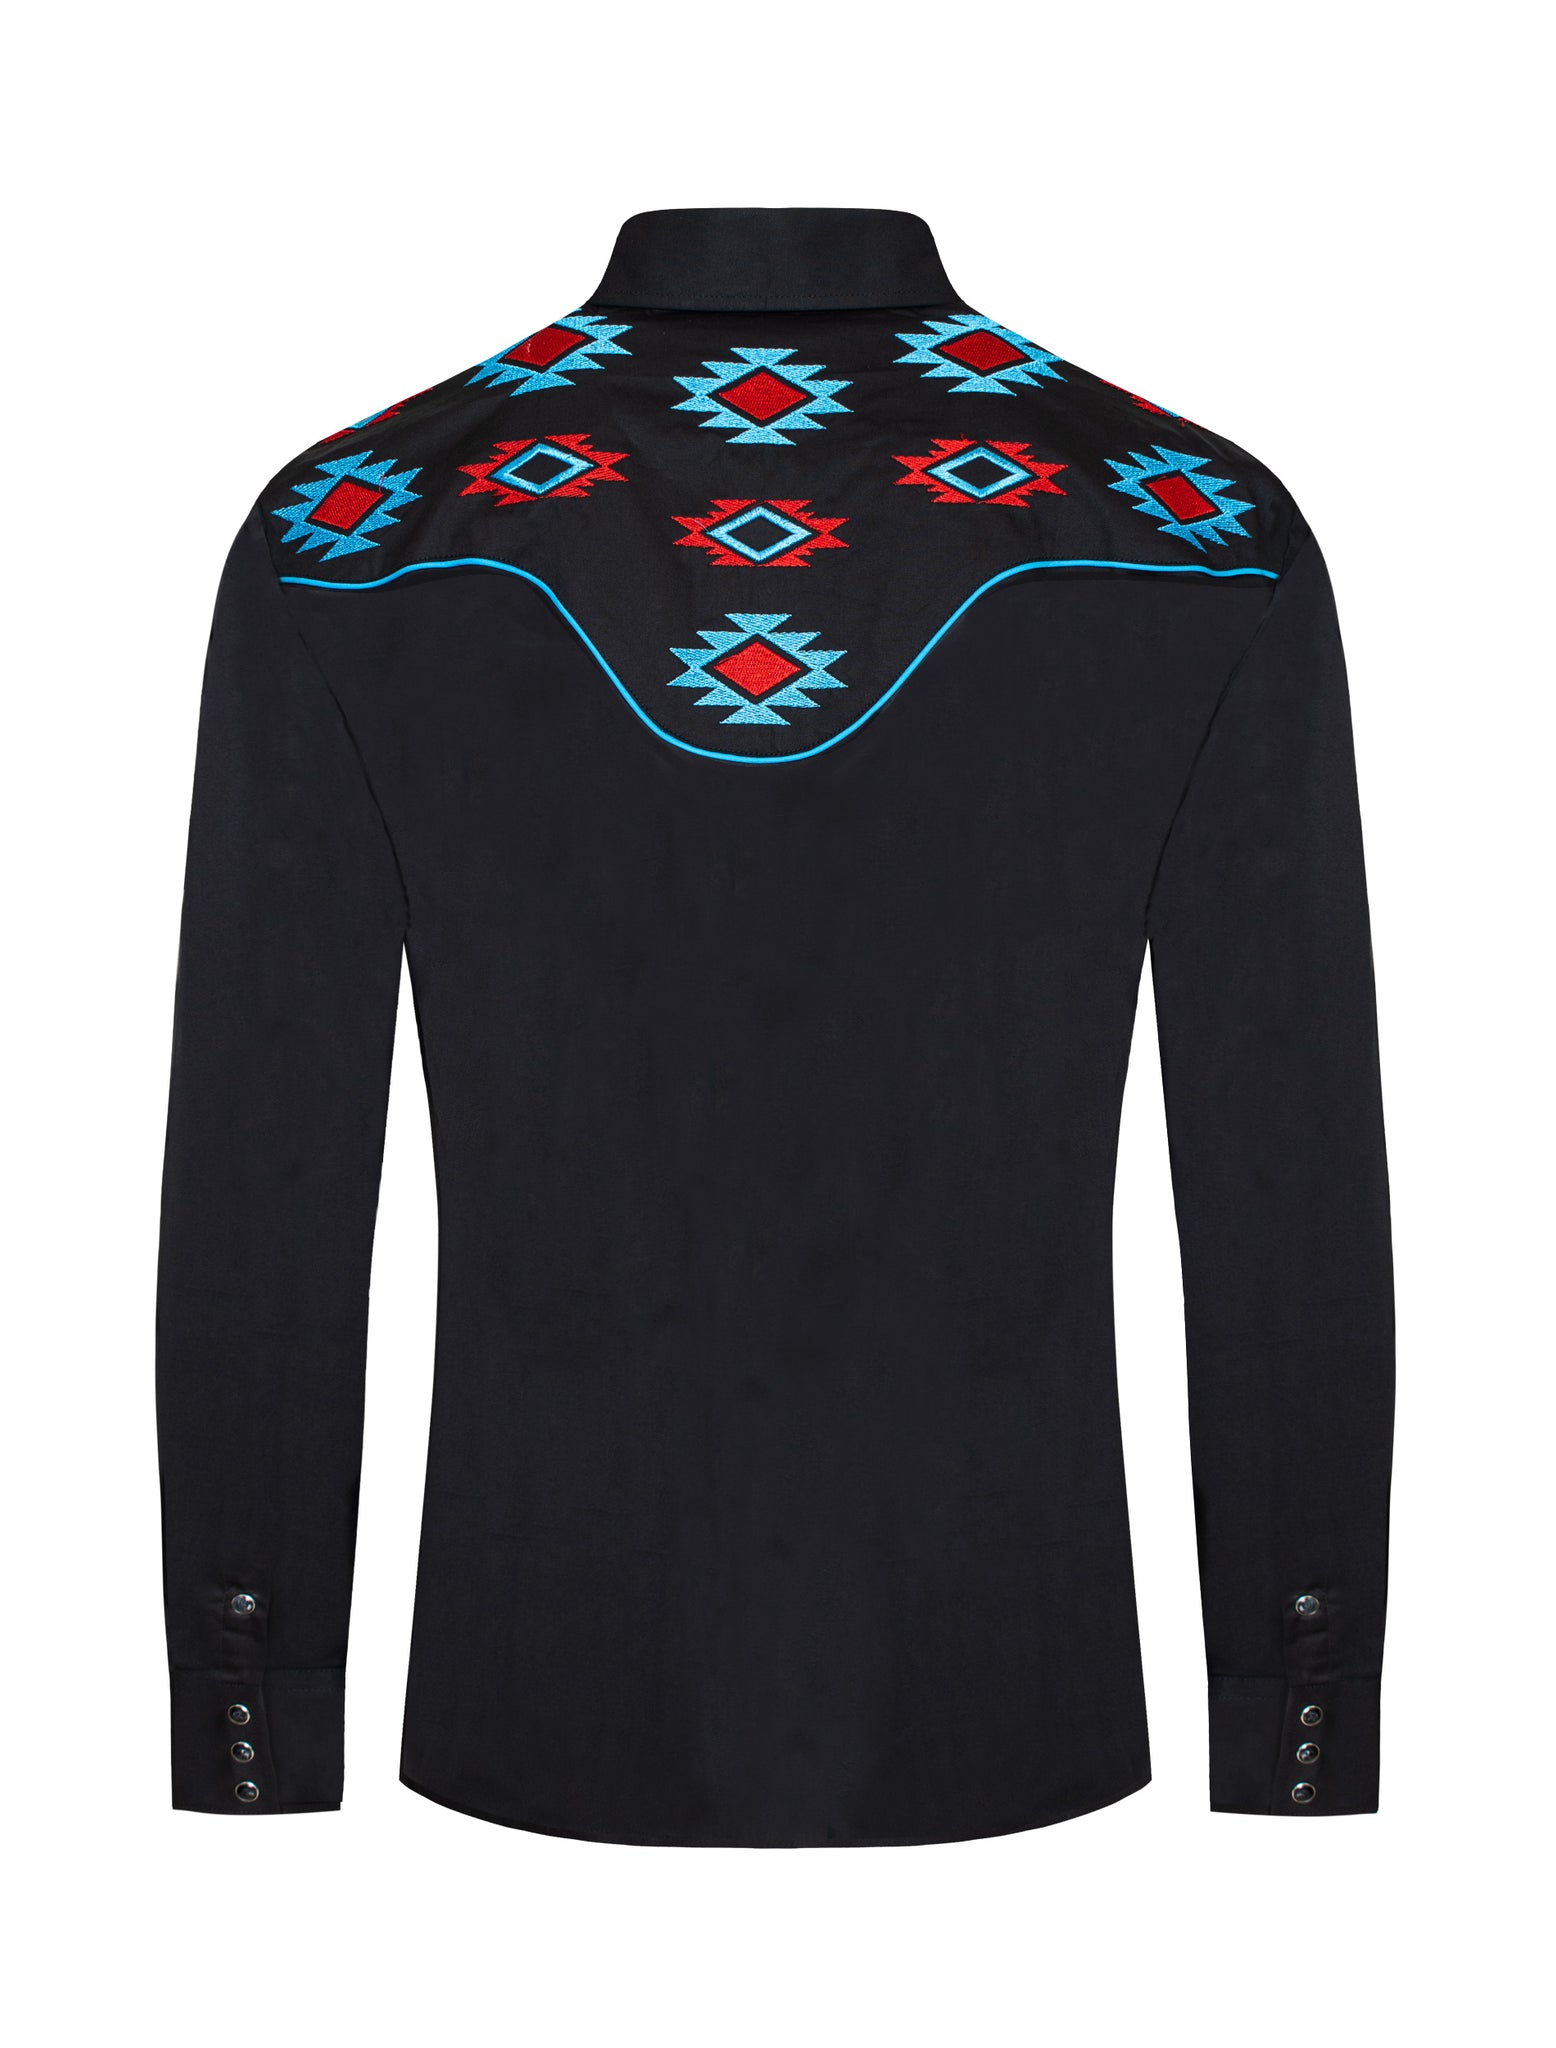 Men's Western Cowboy Embroidery Shirt -PS500L-572